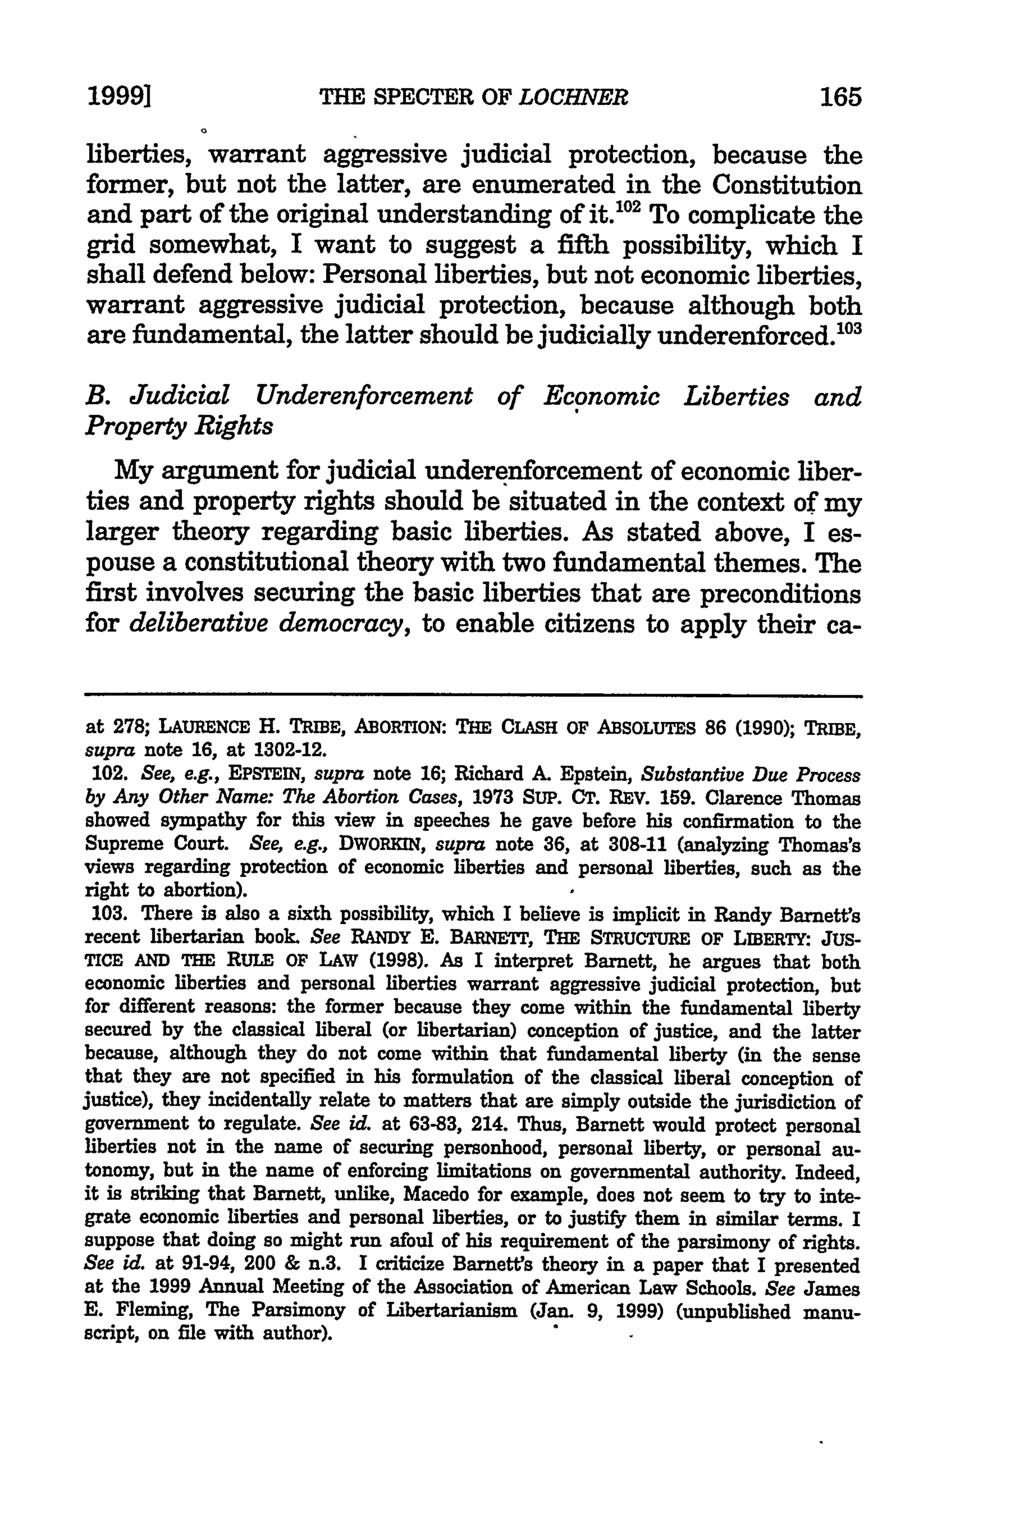 1999] THE SPECTER OF LOCHNER 165 liberties, warrant aggressive judicial protection, because the former, but not the latter, are enumerated in the Constitution and part of the original understanding